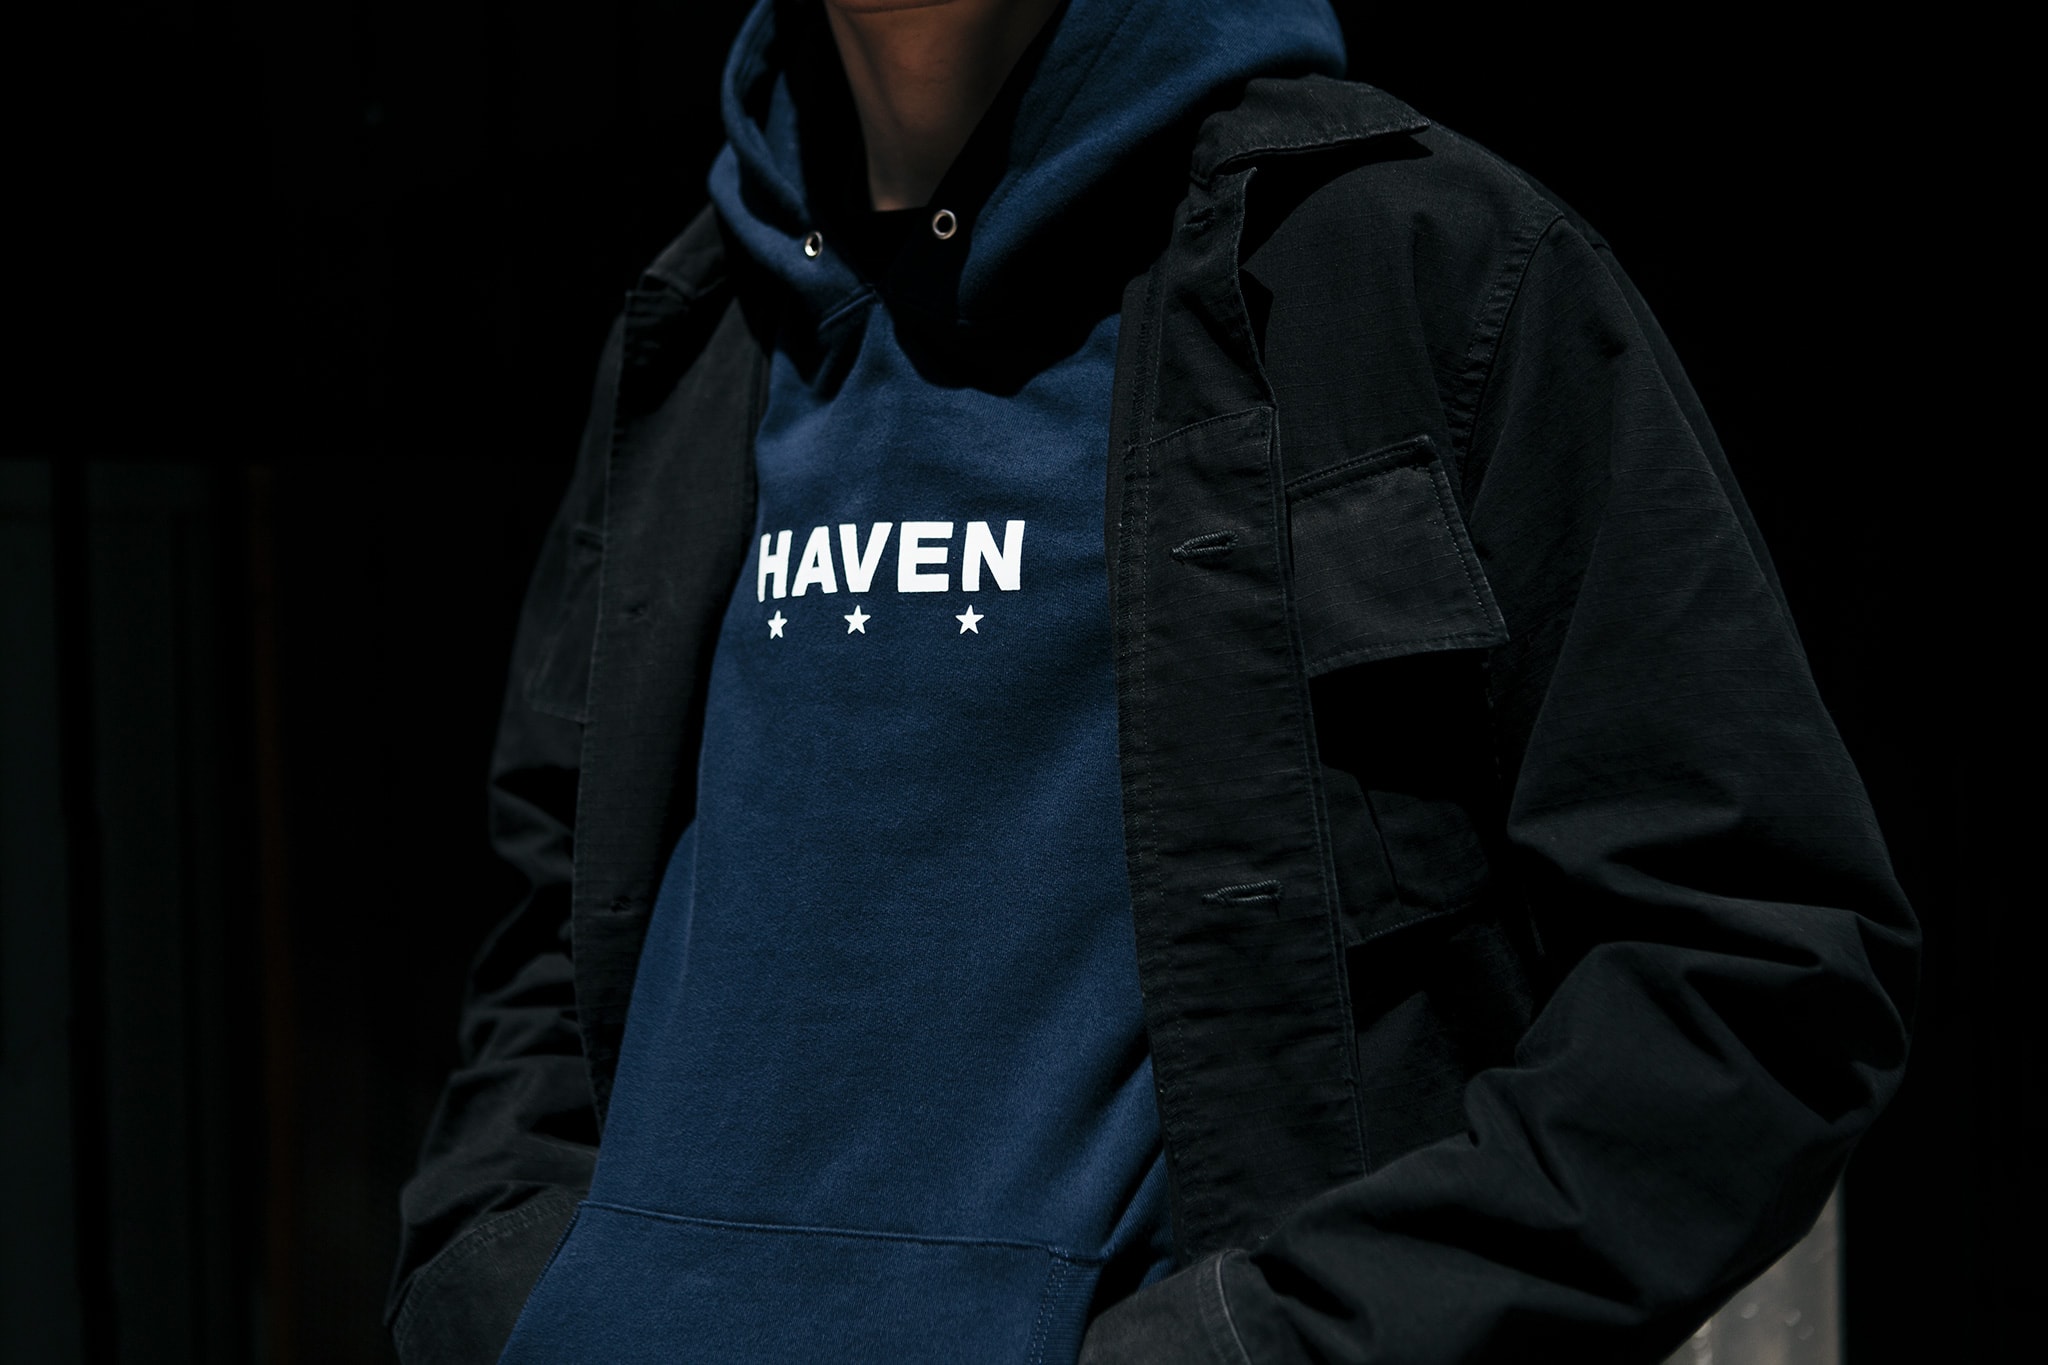 Haven fall winter 2018 delivery drop 1 made in canada japan hoodies tees jackets hats sweaters pants in house label clothing line drop release date buy purchase july 24 2018 drop release date